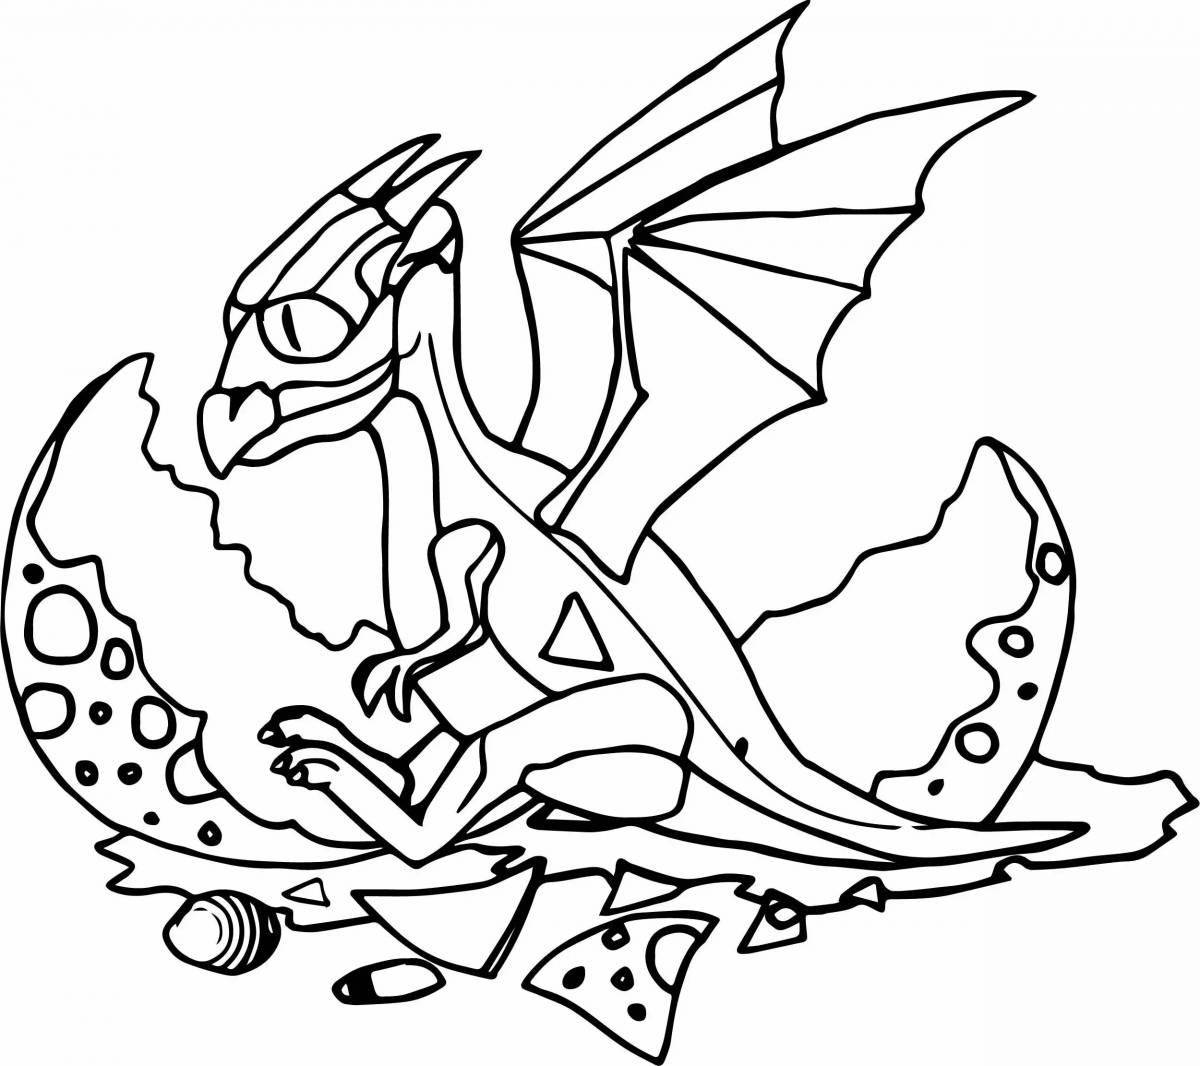 Fun coloring dragons for children 4-5 years old